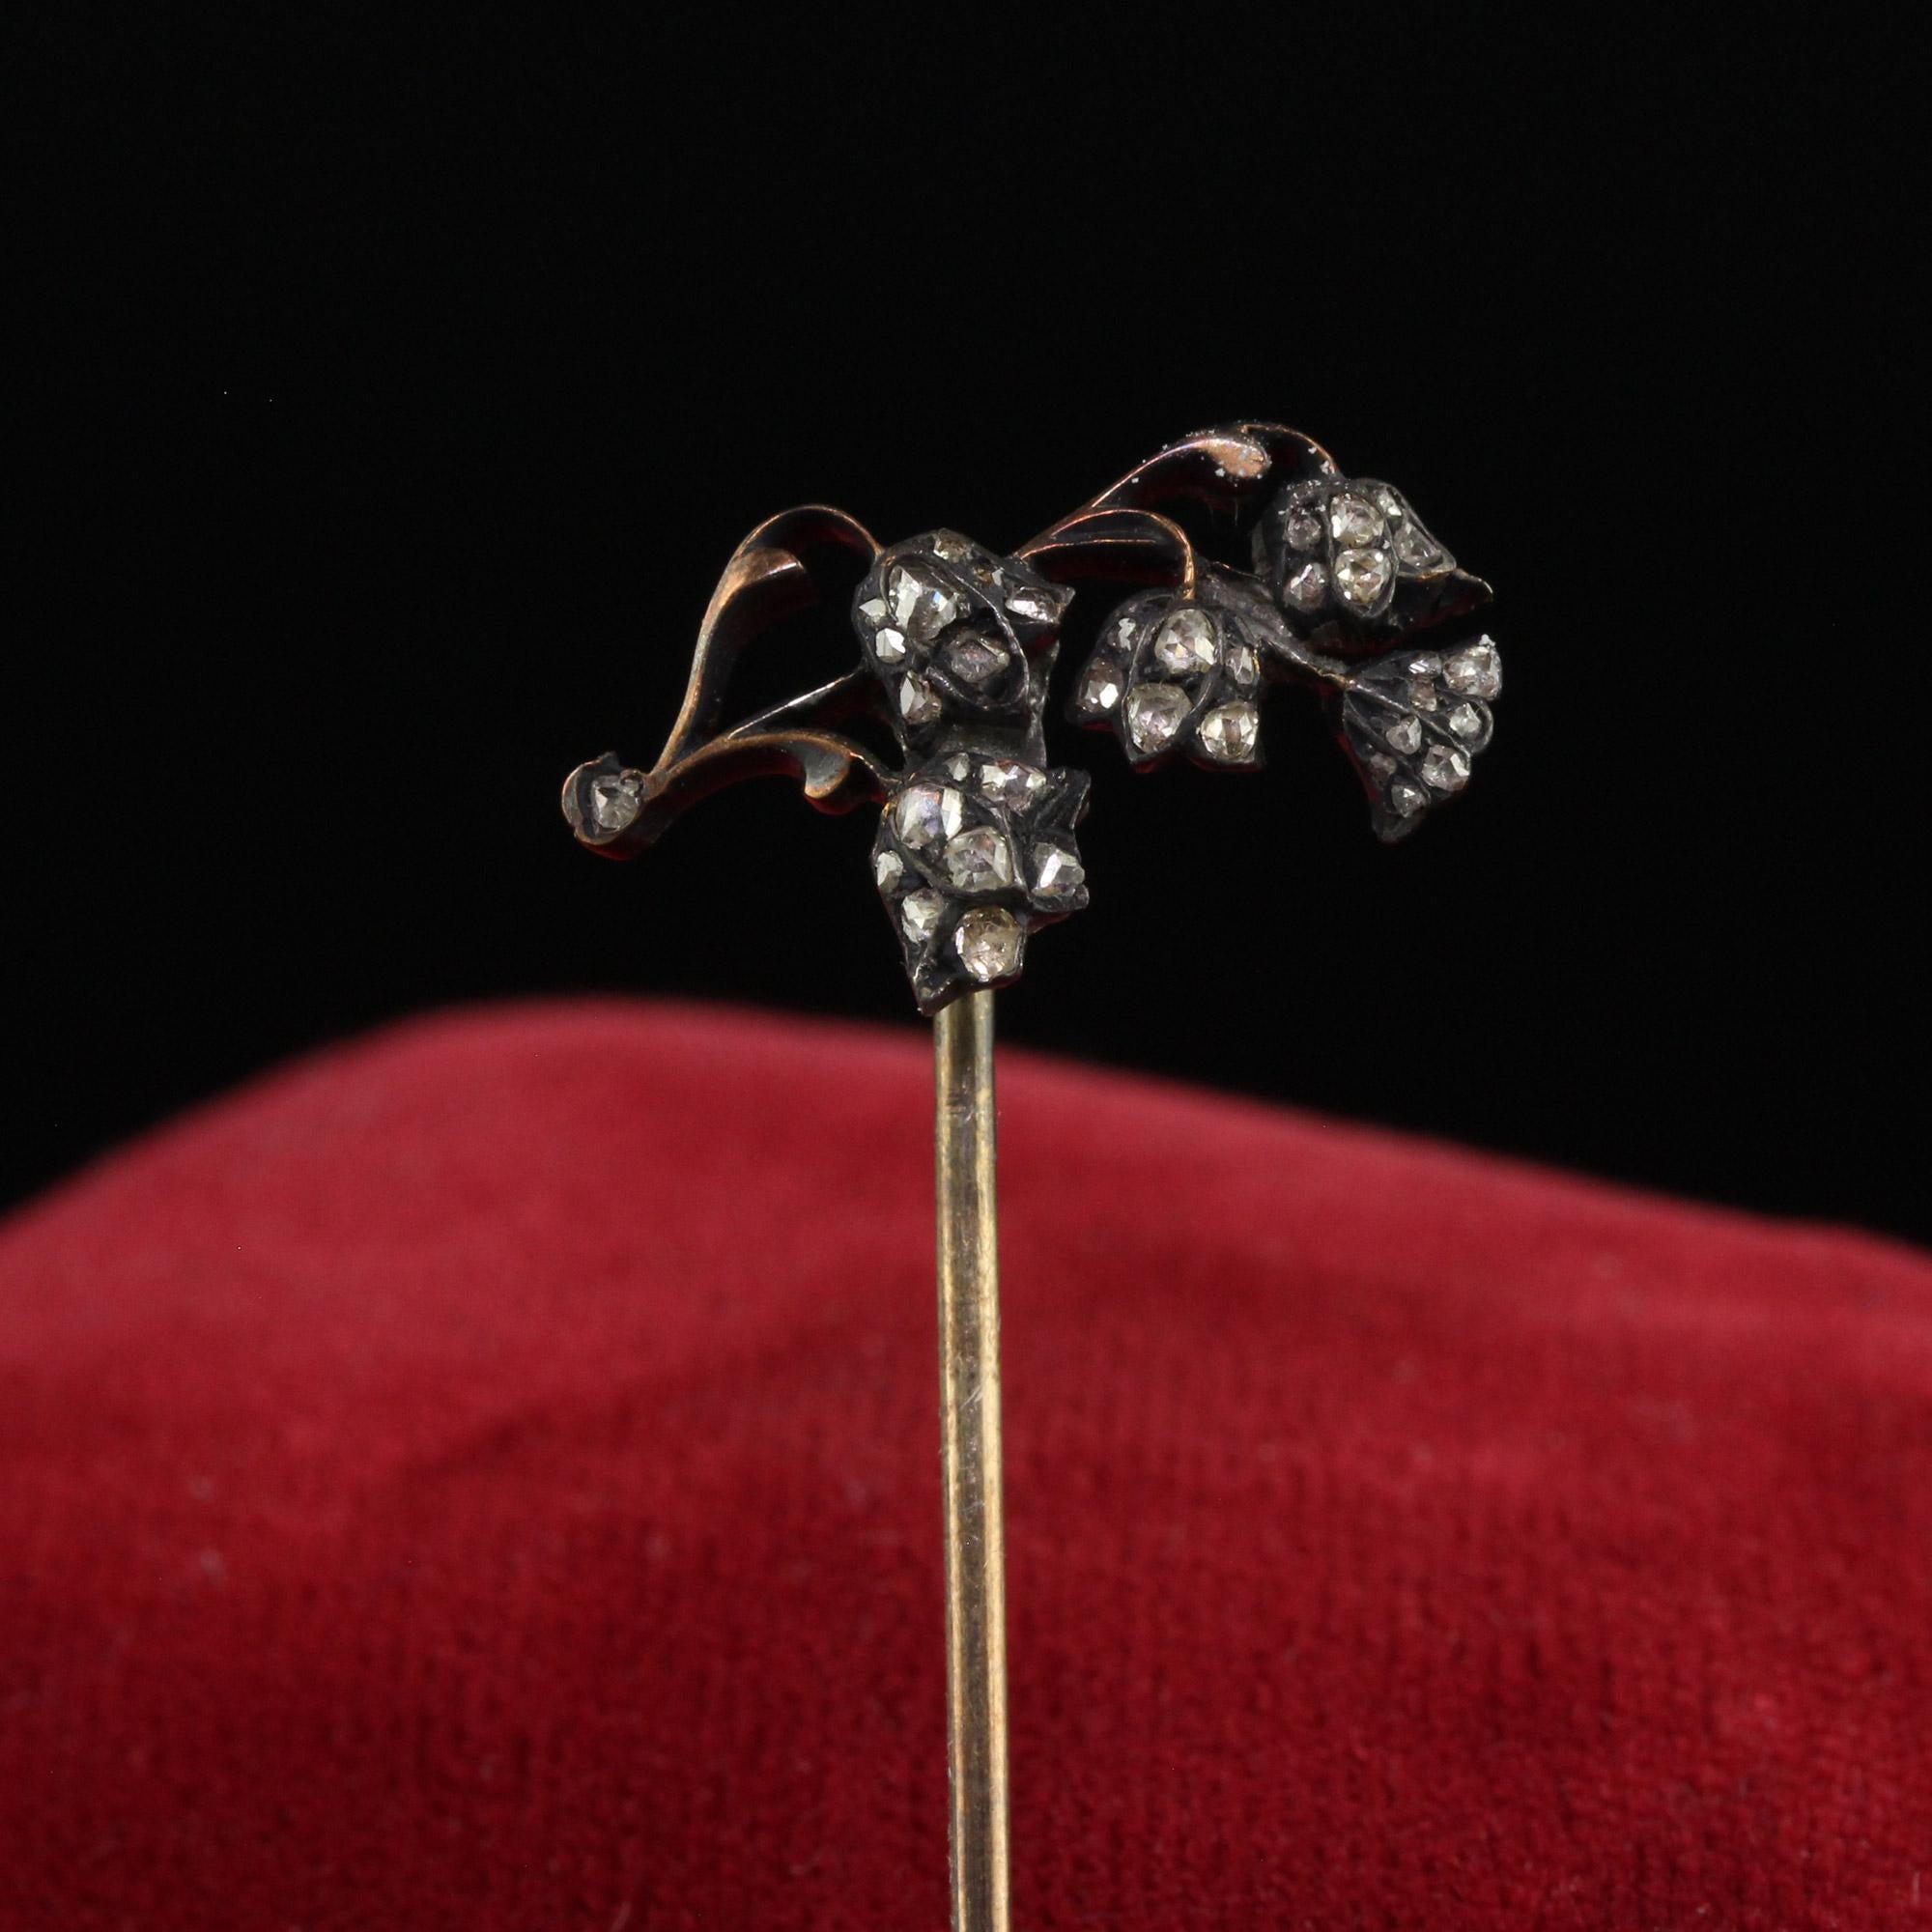 Beautiful Antique Georgian 10K Yellow Gold Silver Top Diamond Floral Stick Pin. This beautiful stick pin is crafted in 10k yellow gold and silver. The pin features a beautiful floral design that has old cut diamonds set on top. The pin tests as 10k